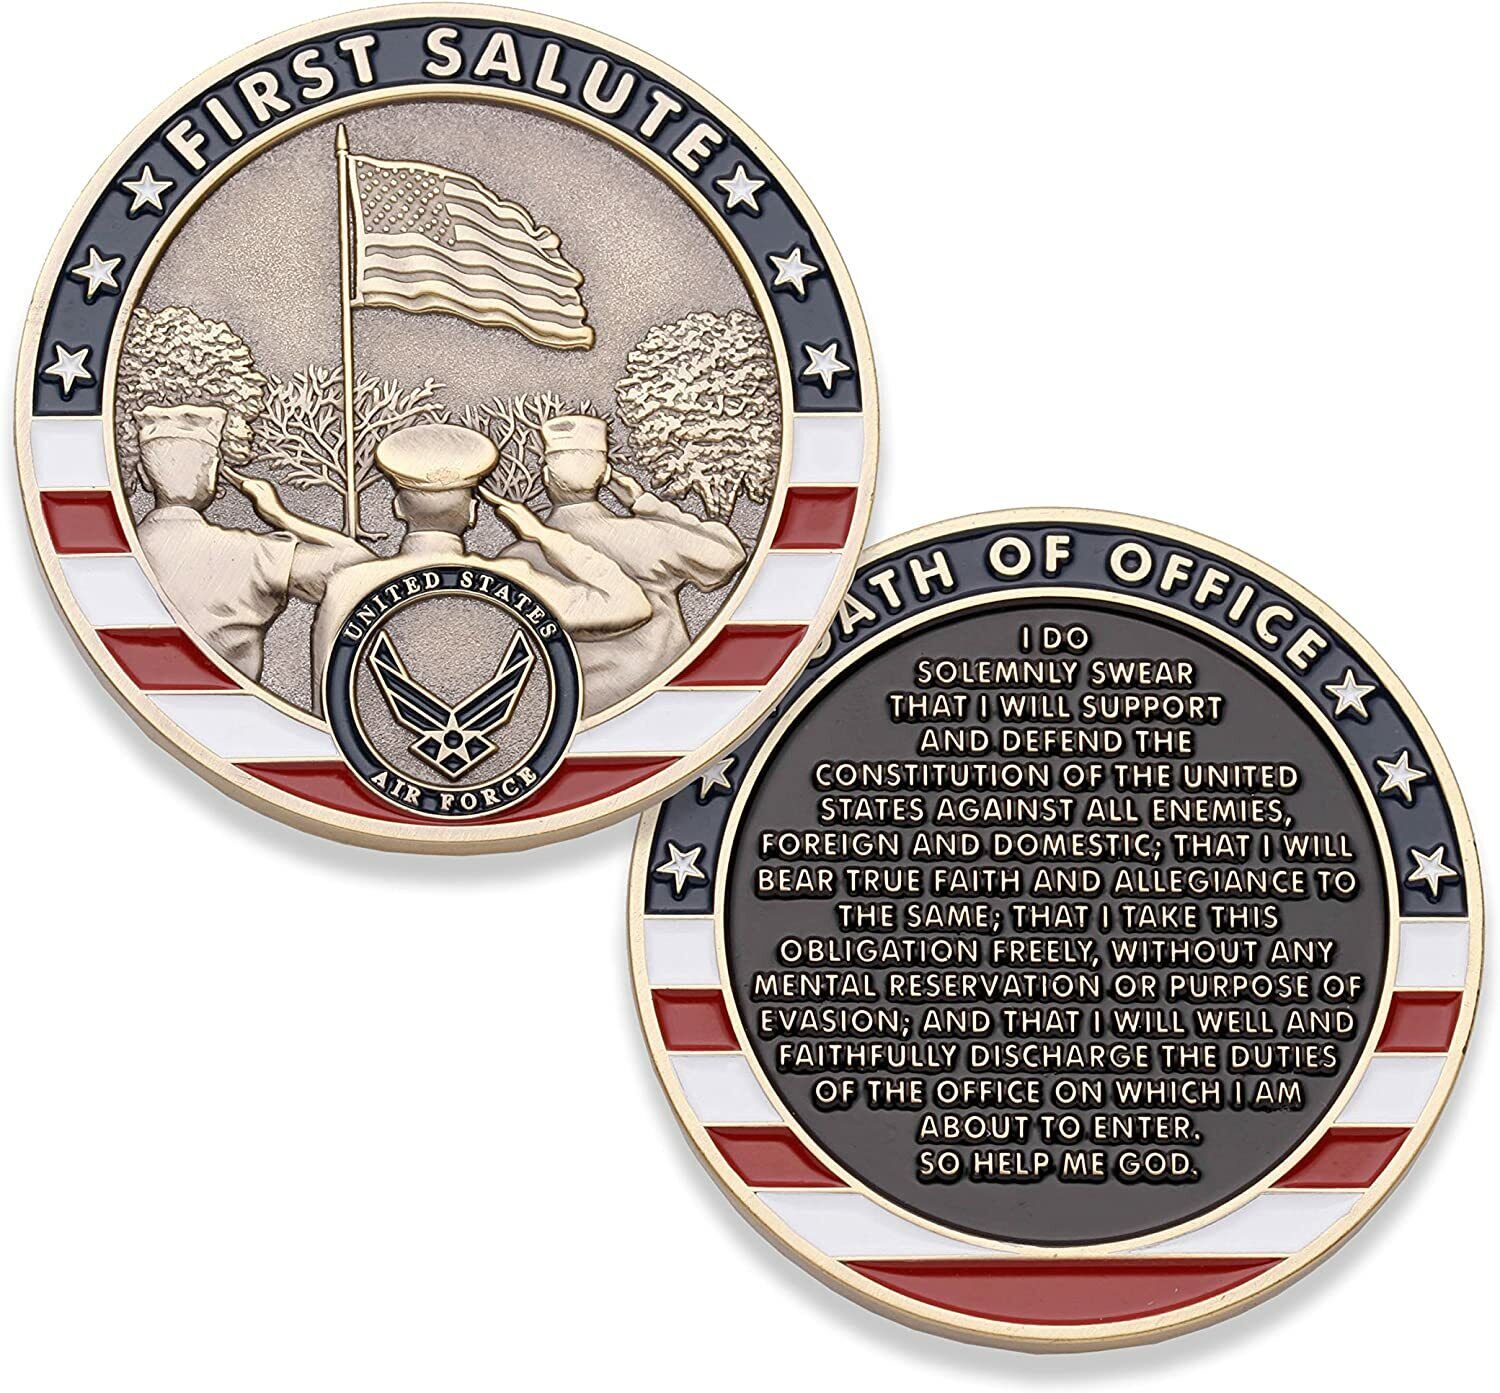 United States Air Force First Salute Challenge Coin